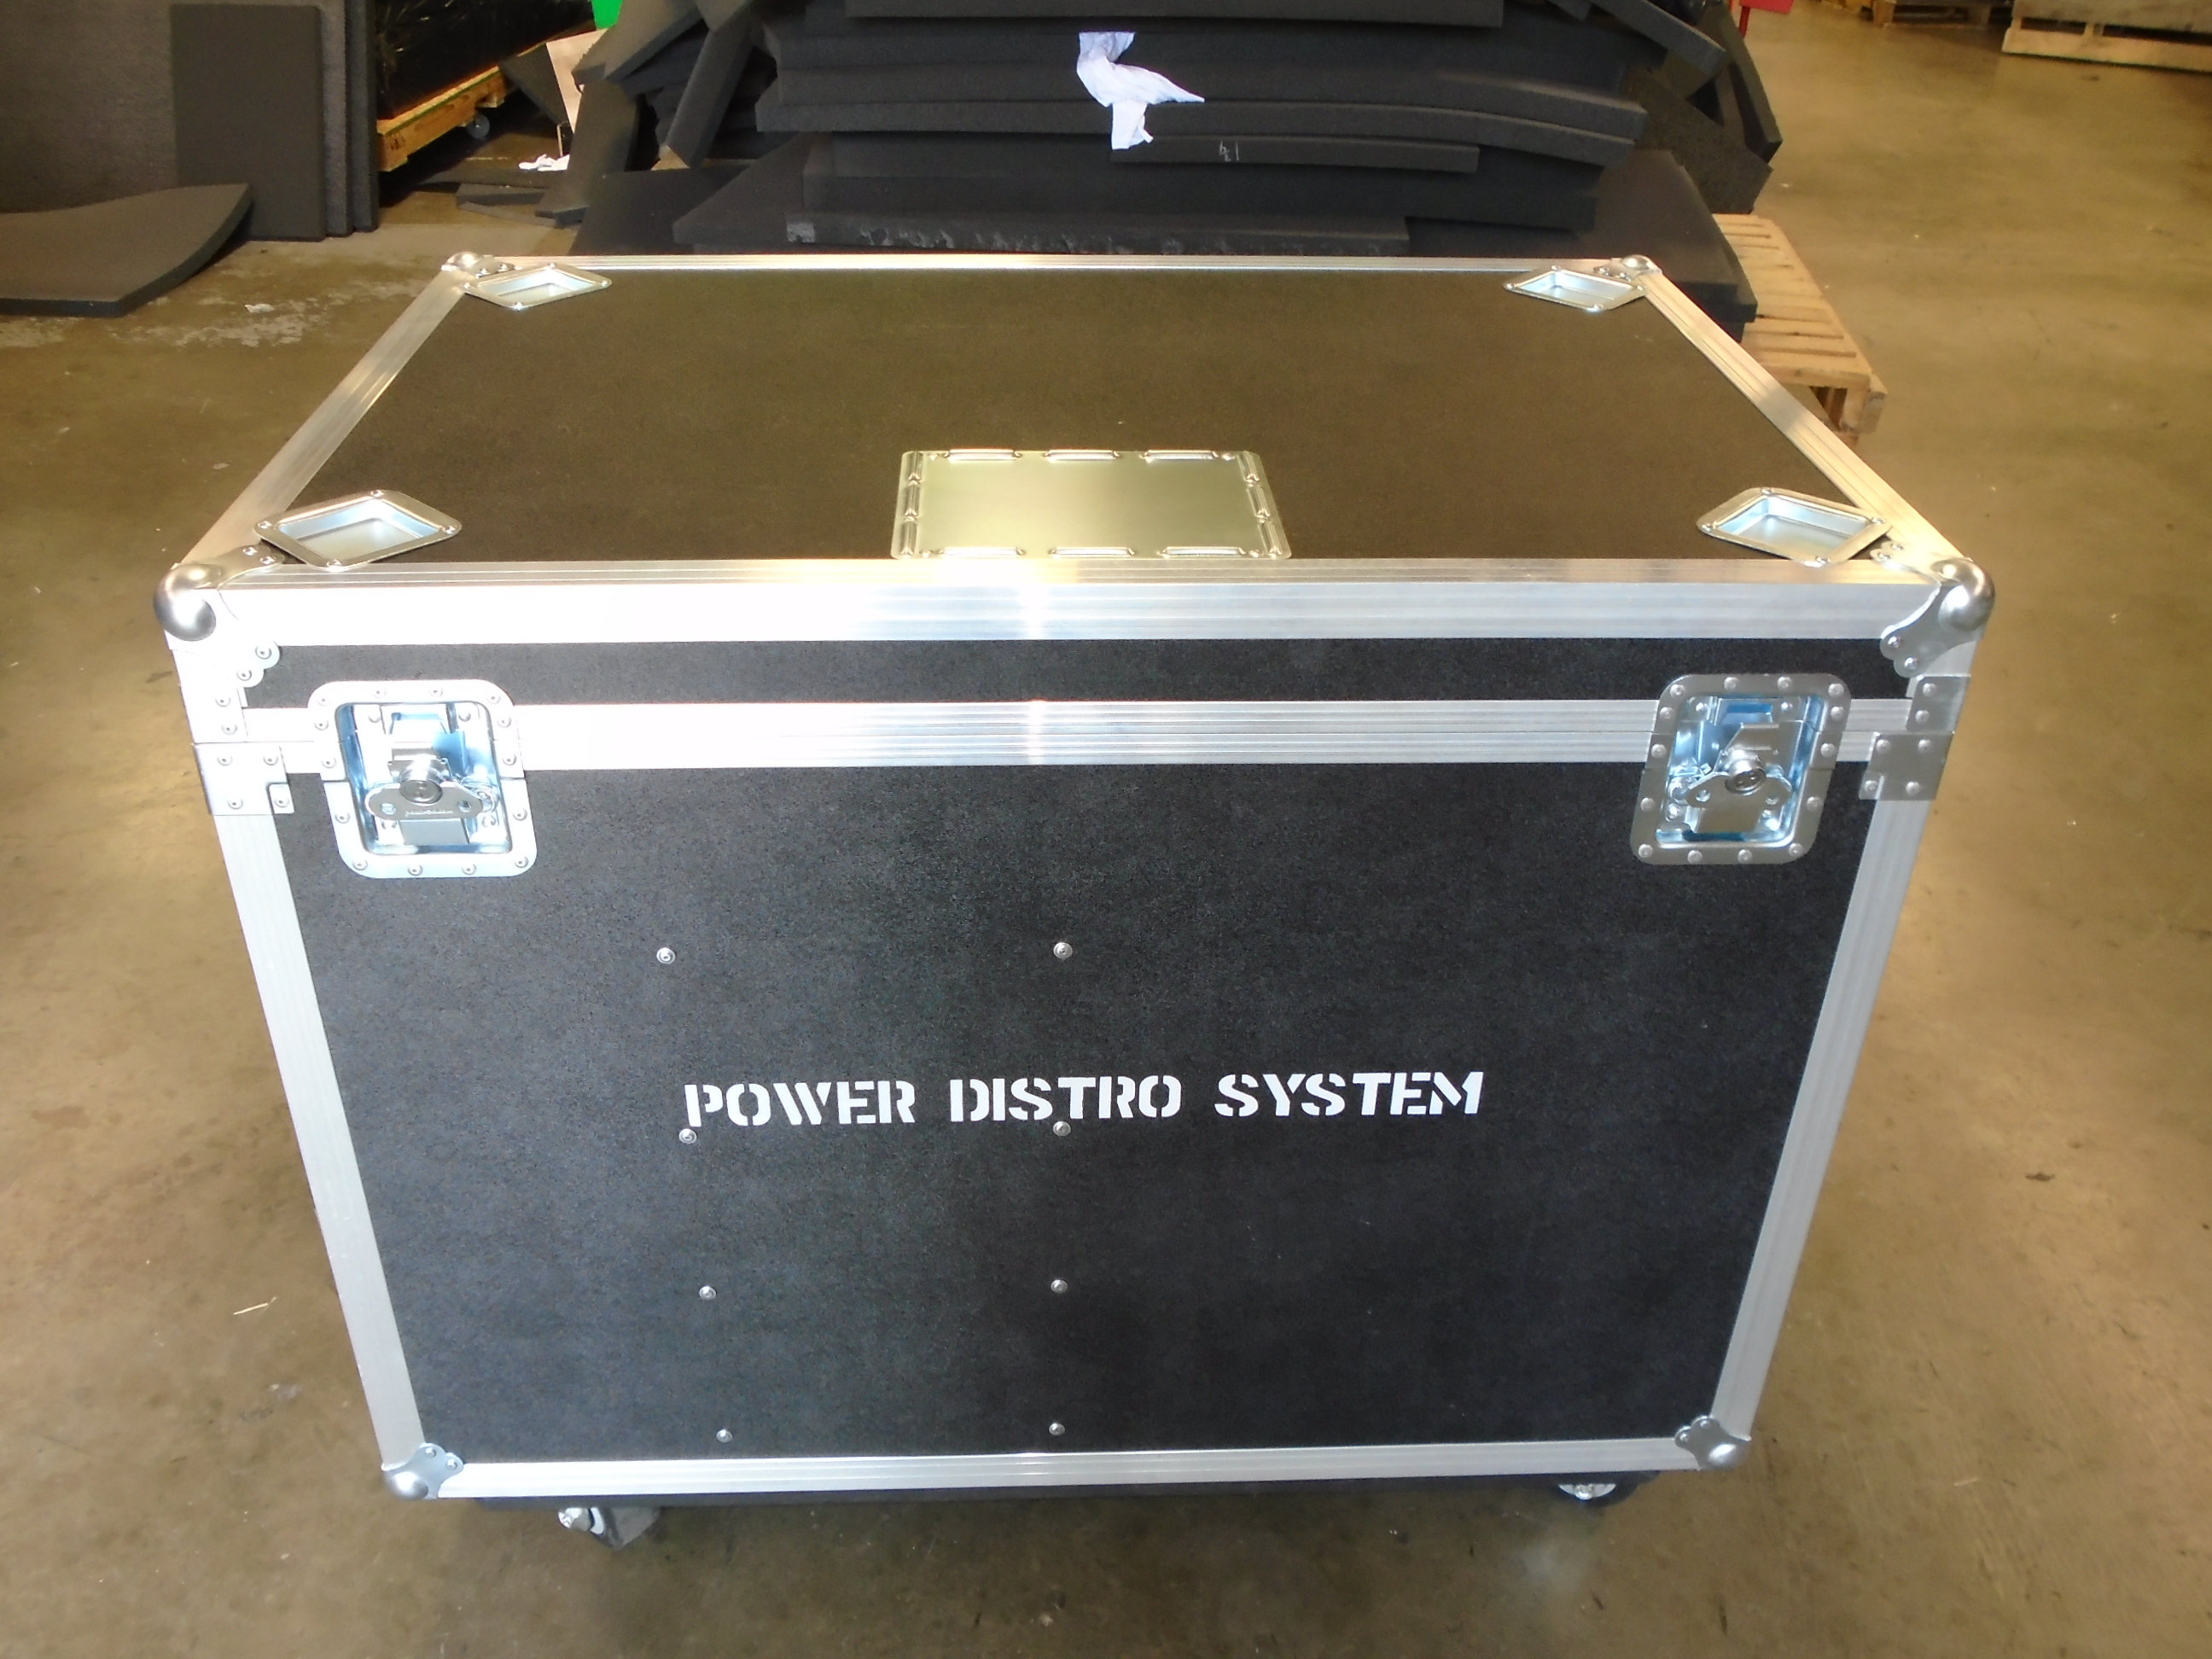 Print # 6951 - Custom Case for (6) Power Distribution Boxes By Nelson Case Corp